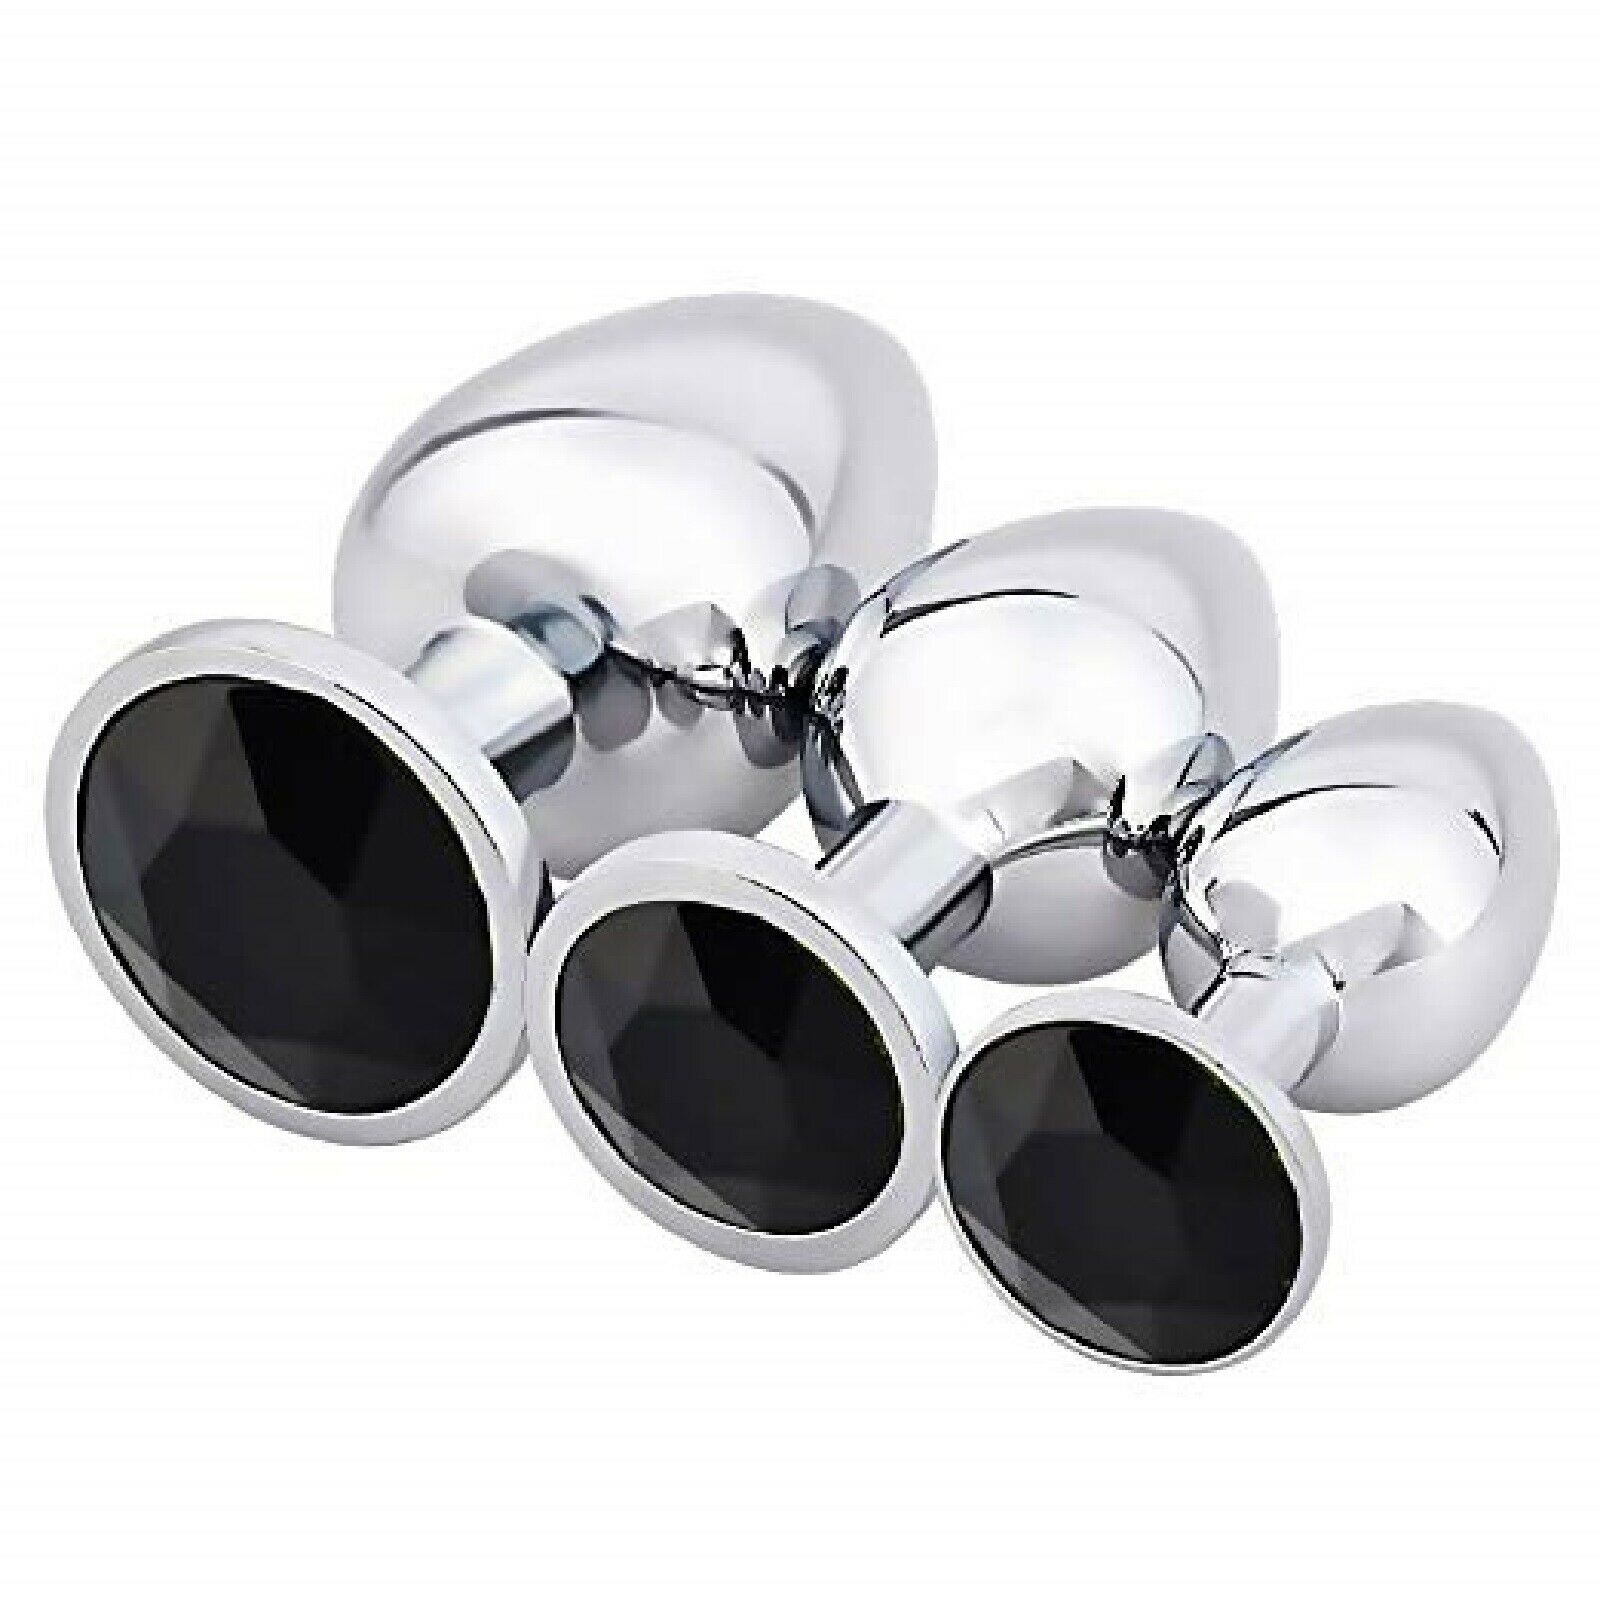 Stainless Steel Butt Plug Sets with Gem - 12 Colours Available